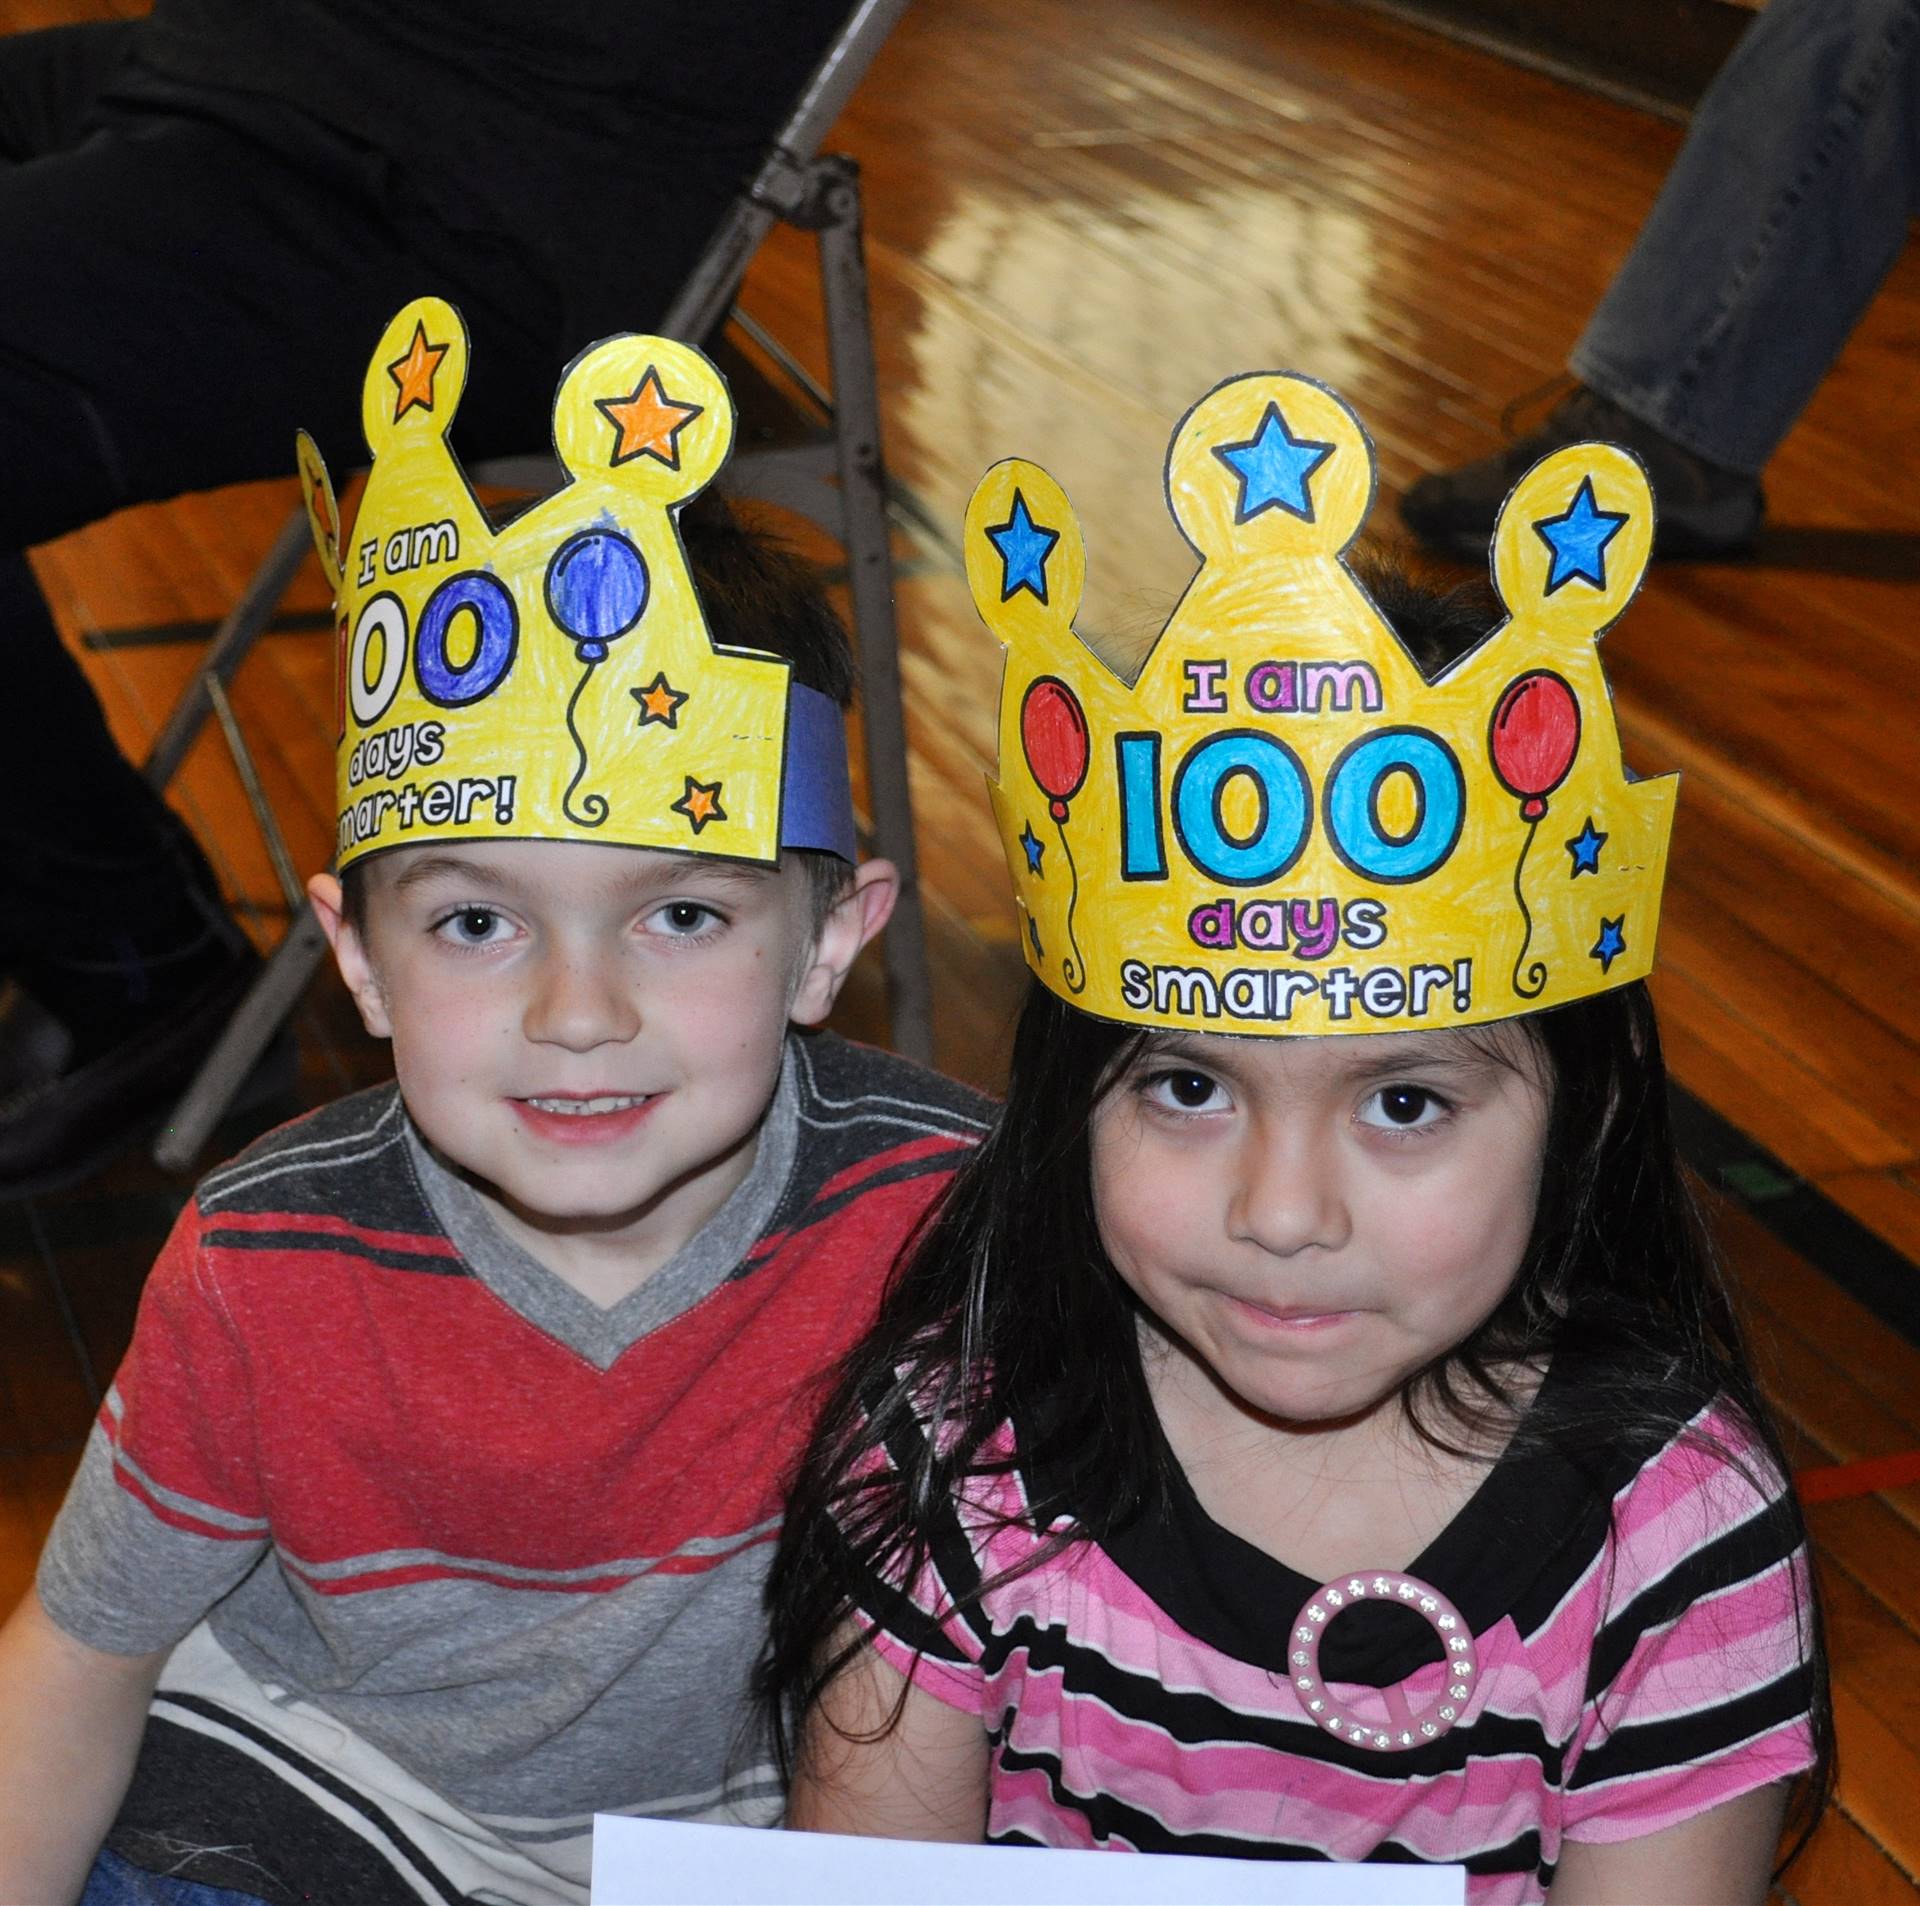 2 students wearing 100 hats.